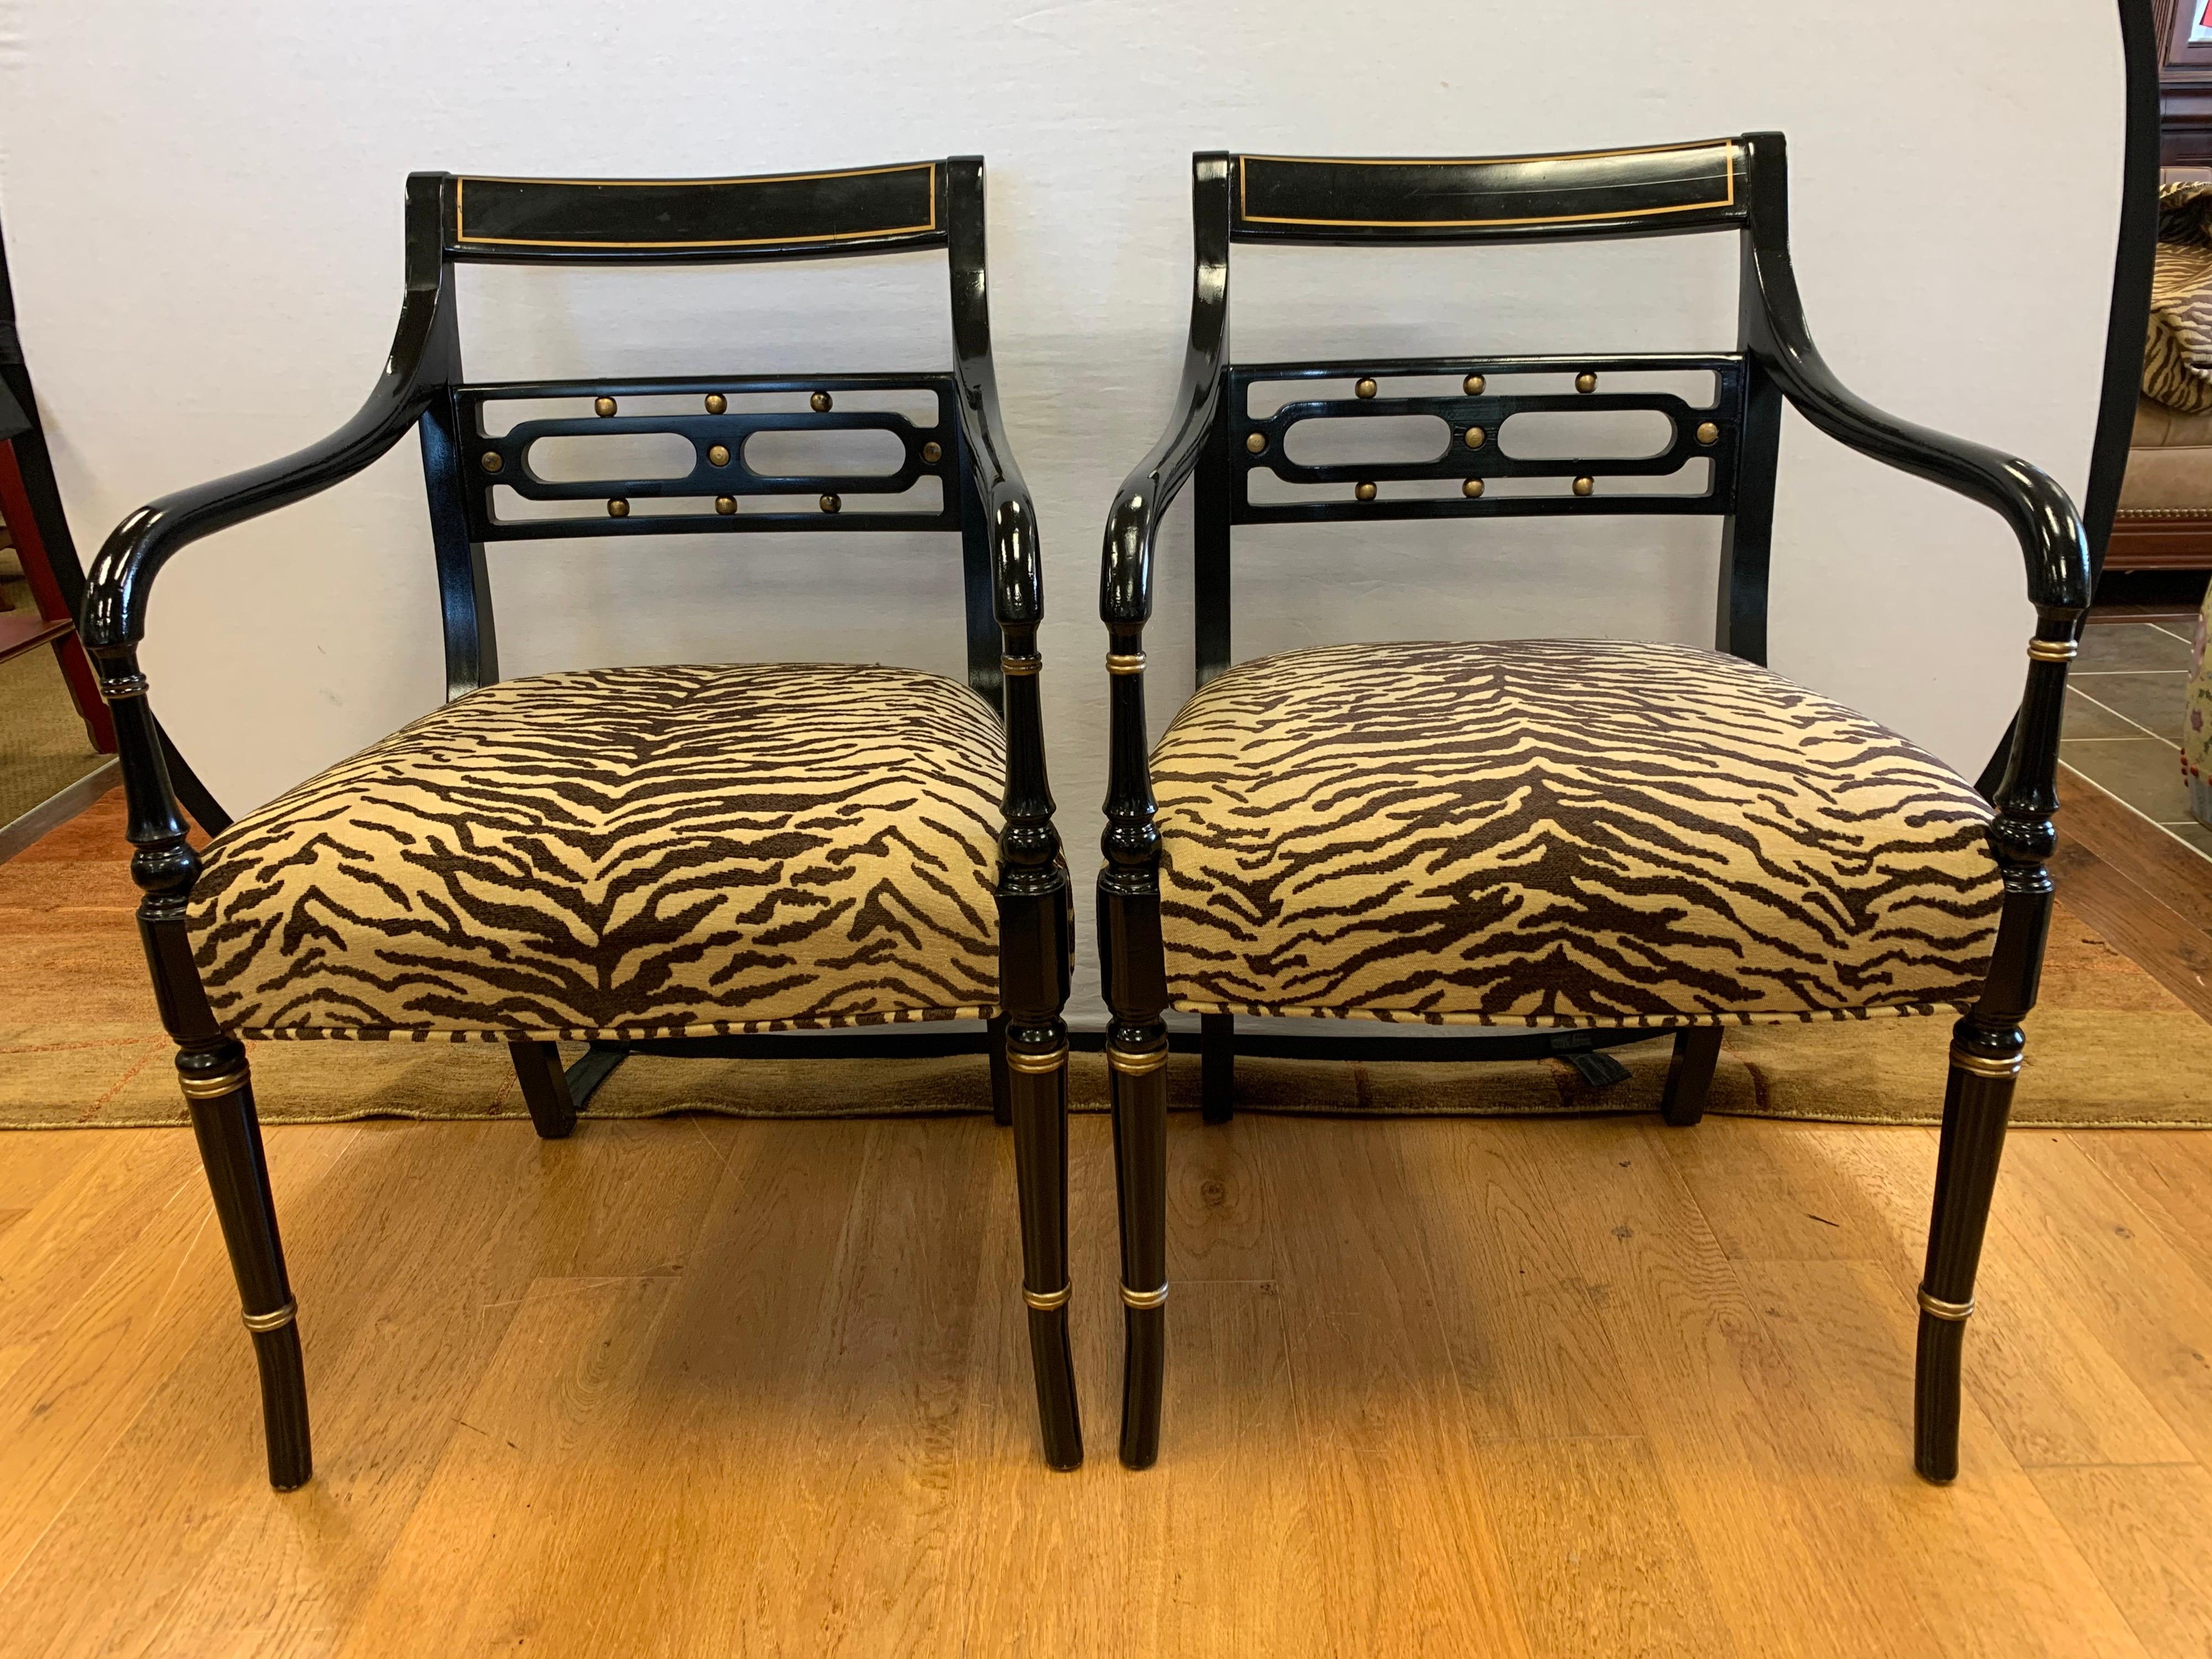 Elegant pair of Regency style dining chairs, ebonized with gold gilt highlights and newly upholstered in zebra print fabric. All dimensions are below. The upholstery is brand new and done in an elegant zebra print.